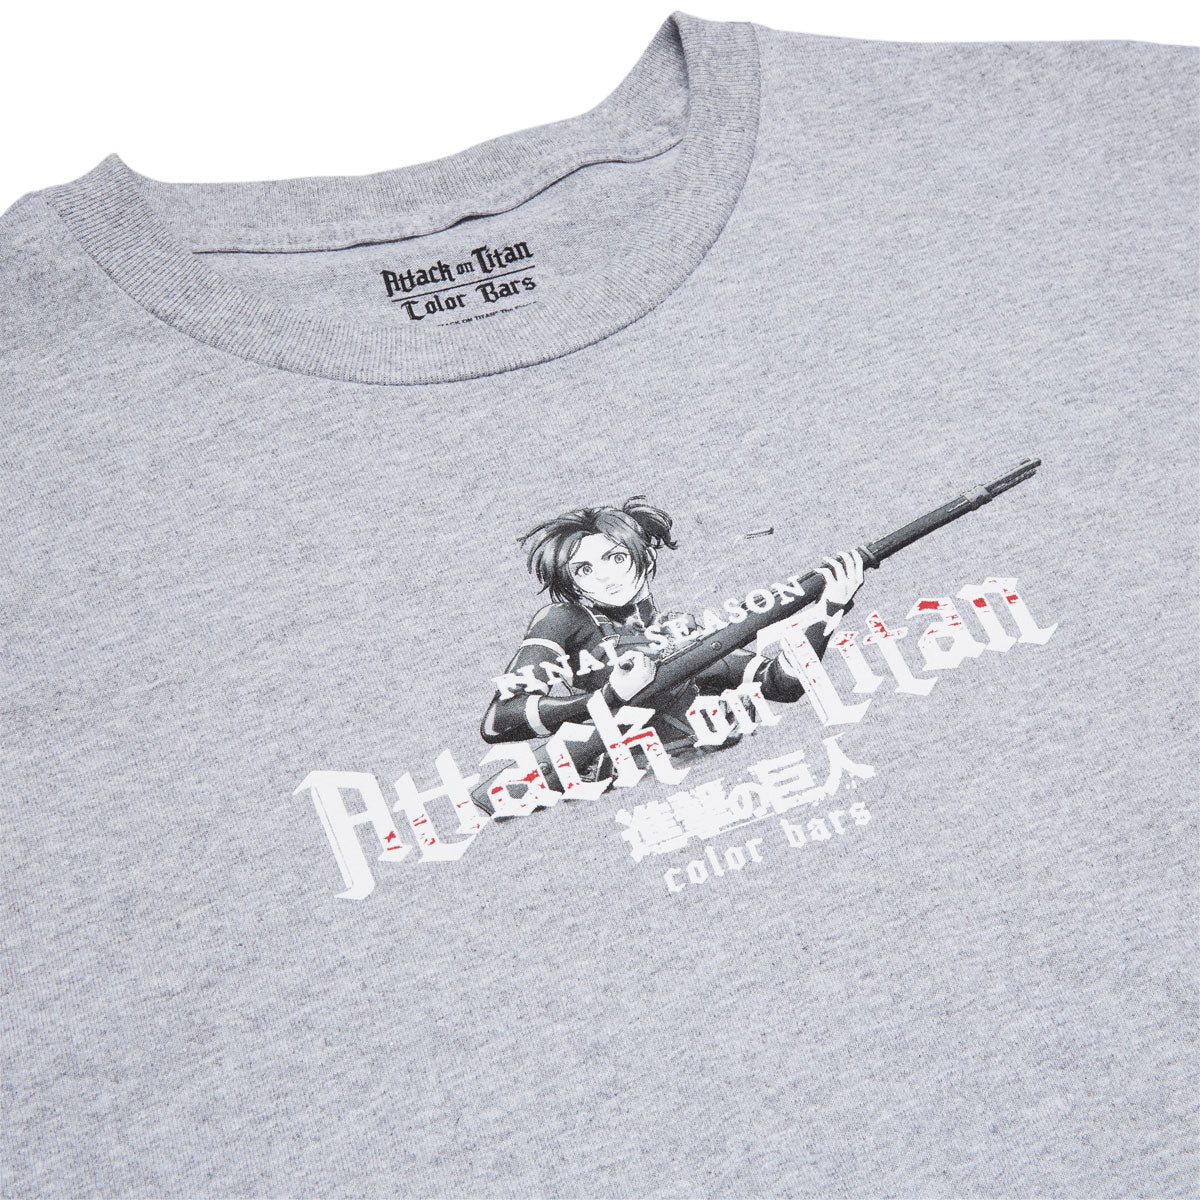 Color Bars x Attack on Titan Loaded T-Shirt - Heather Grey image 2